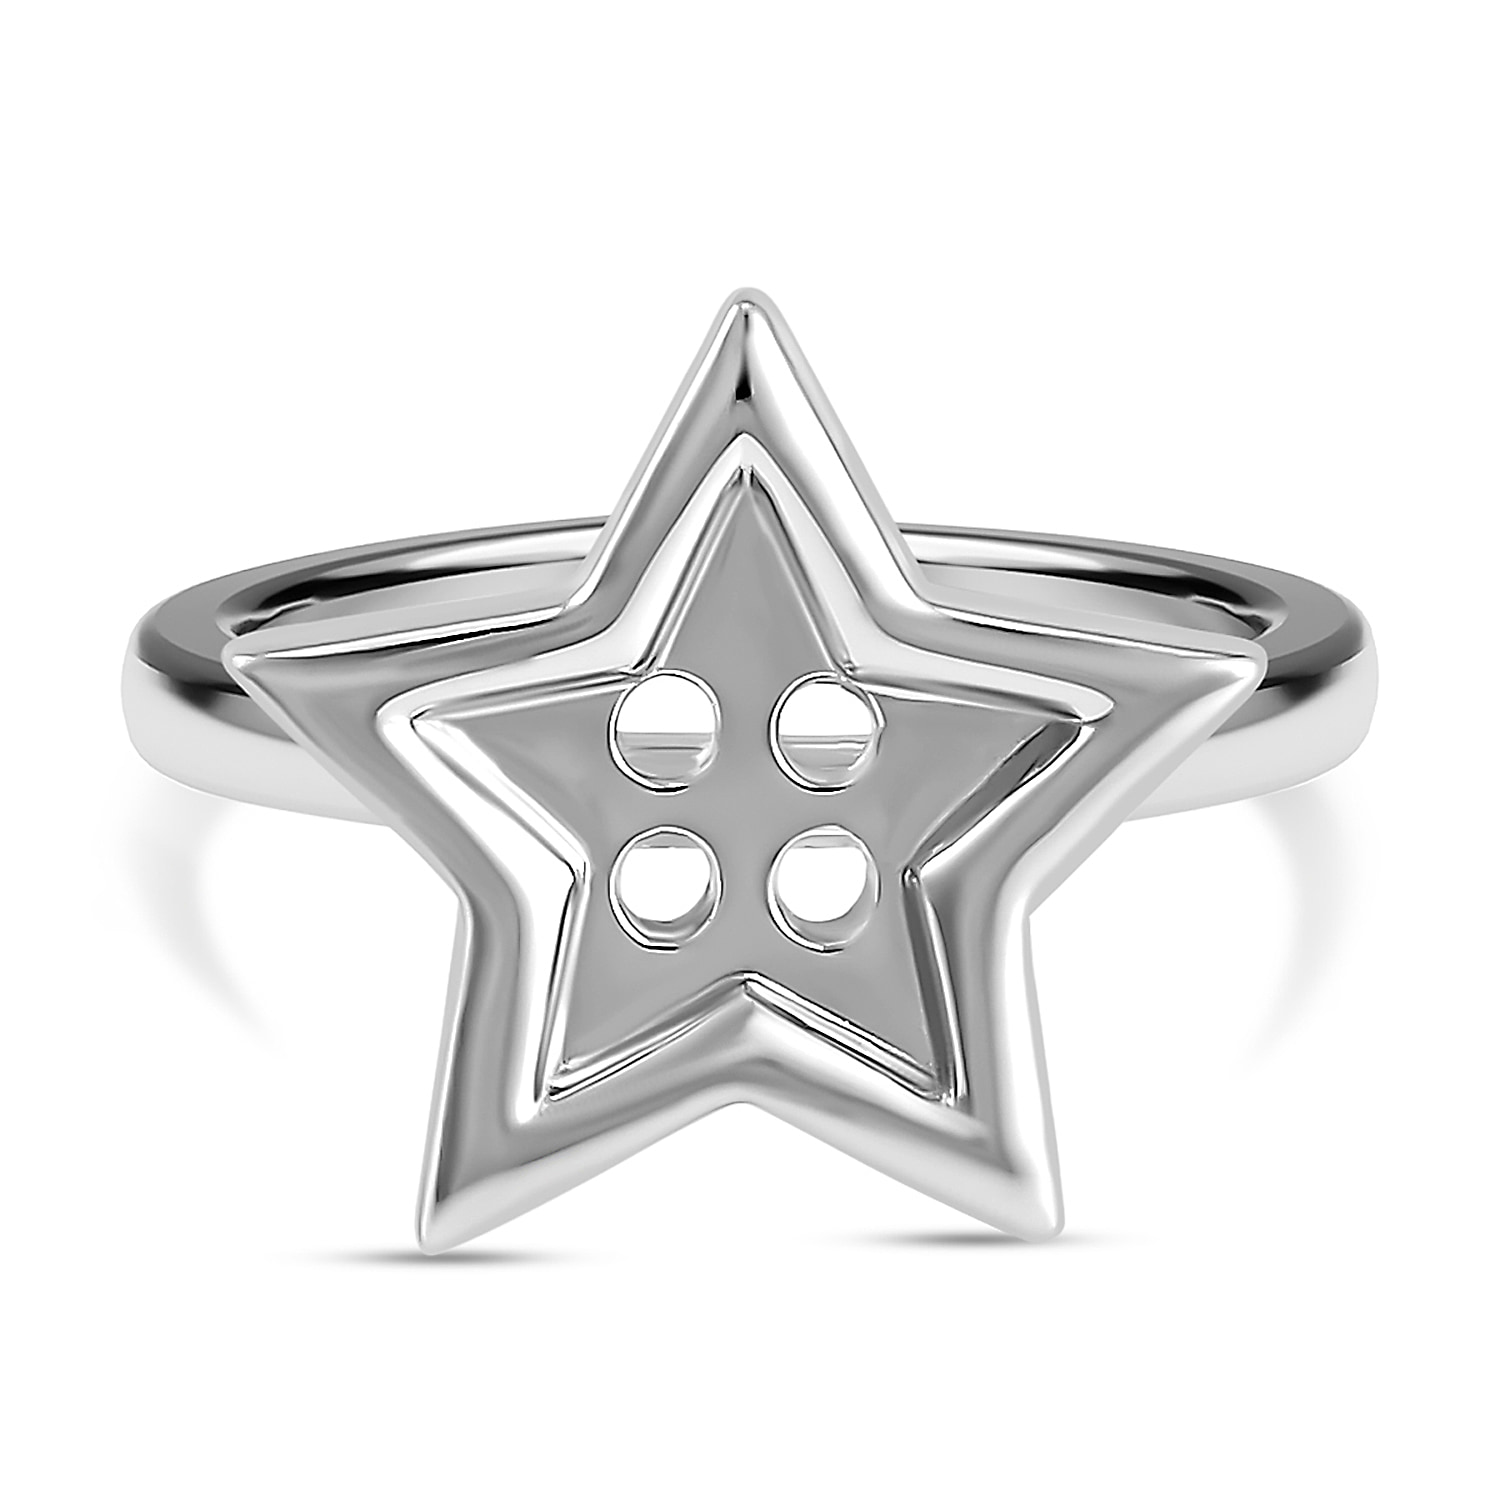 Lucy Q Button Collection - Rhodium Overlay Sterling Silver Star Button Ring